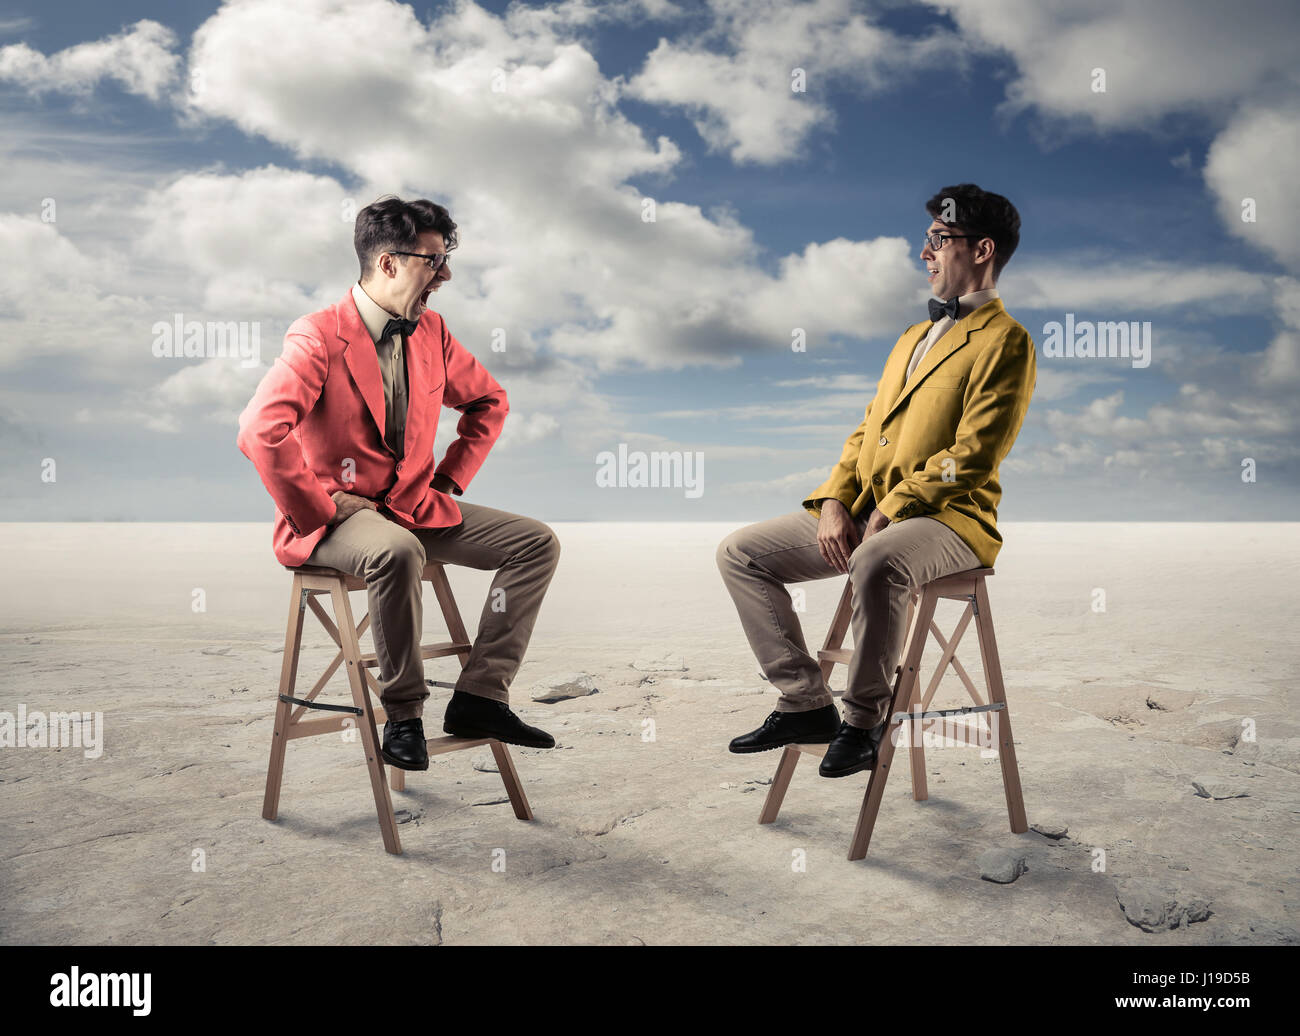 2 men sitting in front of each other in desert Stock Photo